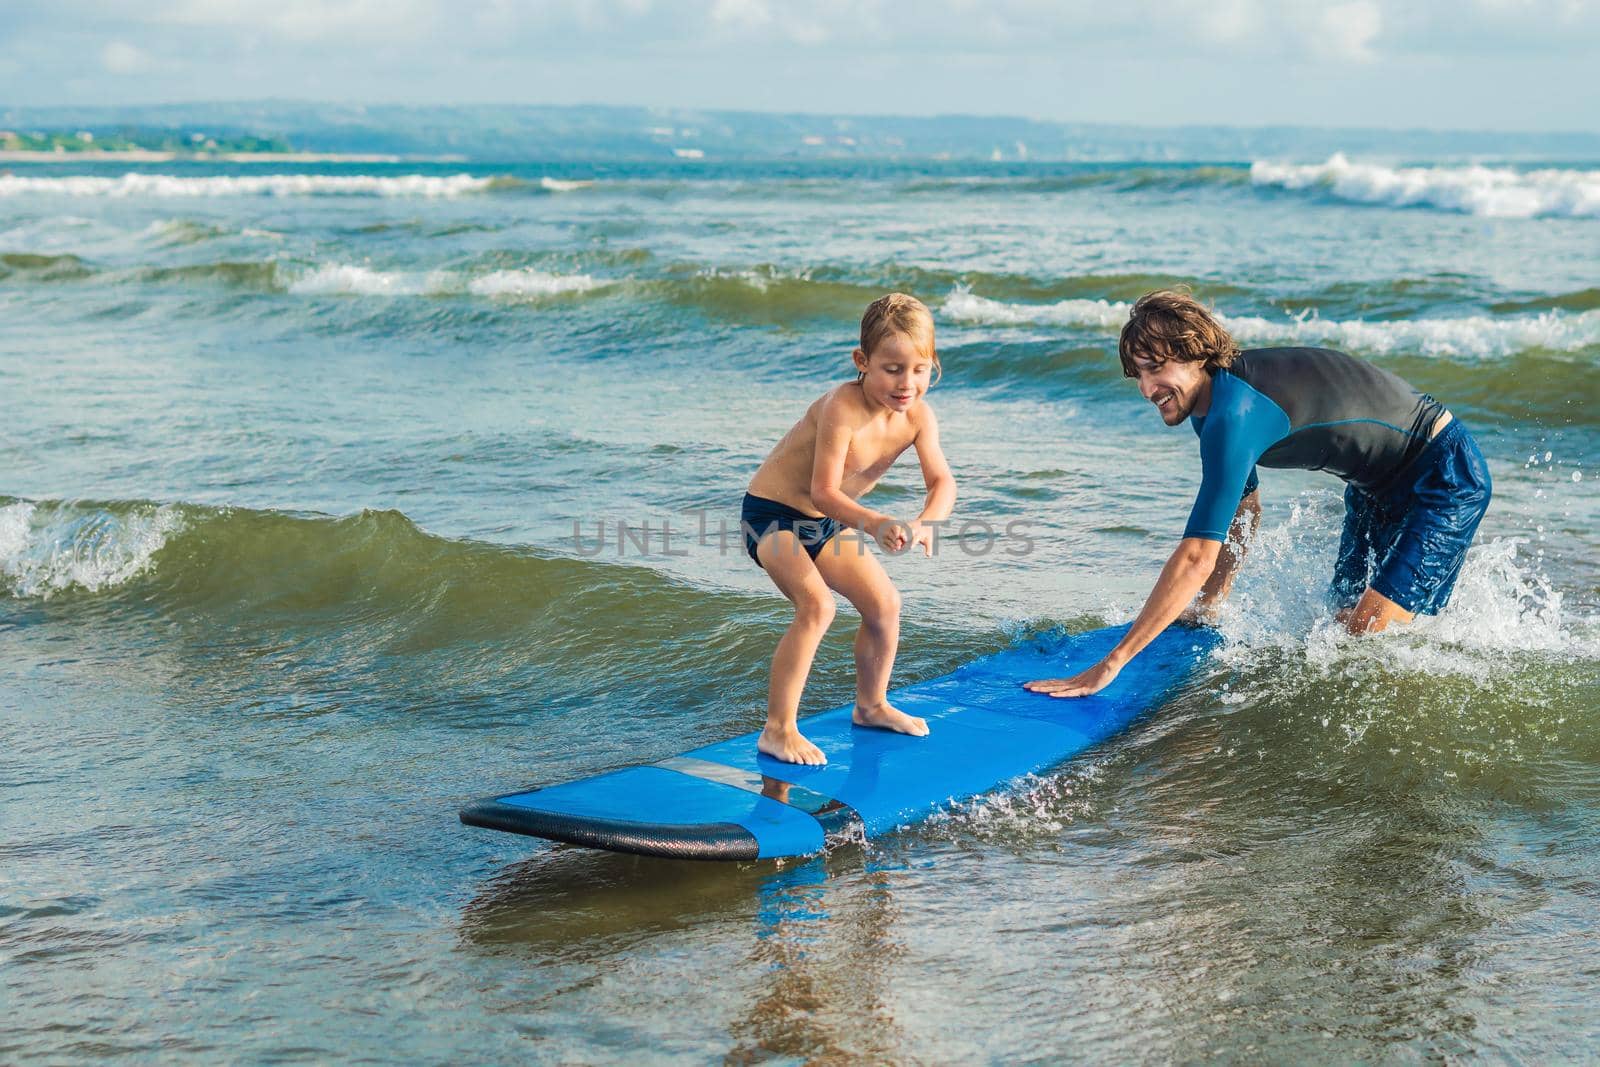 Father or instructor teaching his 4 year old son how to surf in the sea on vacation or holiday. Travel and sports with children concept. Surfing lesson for kids by galitskaya